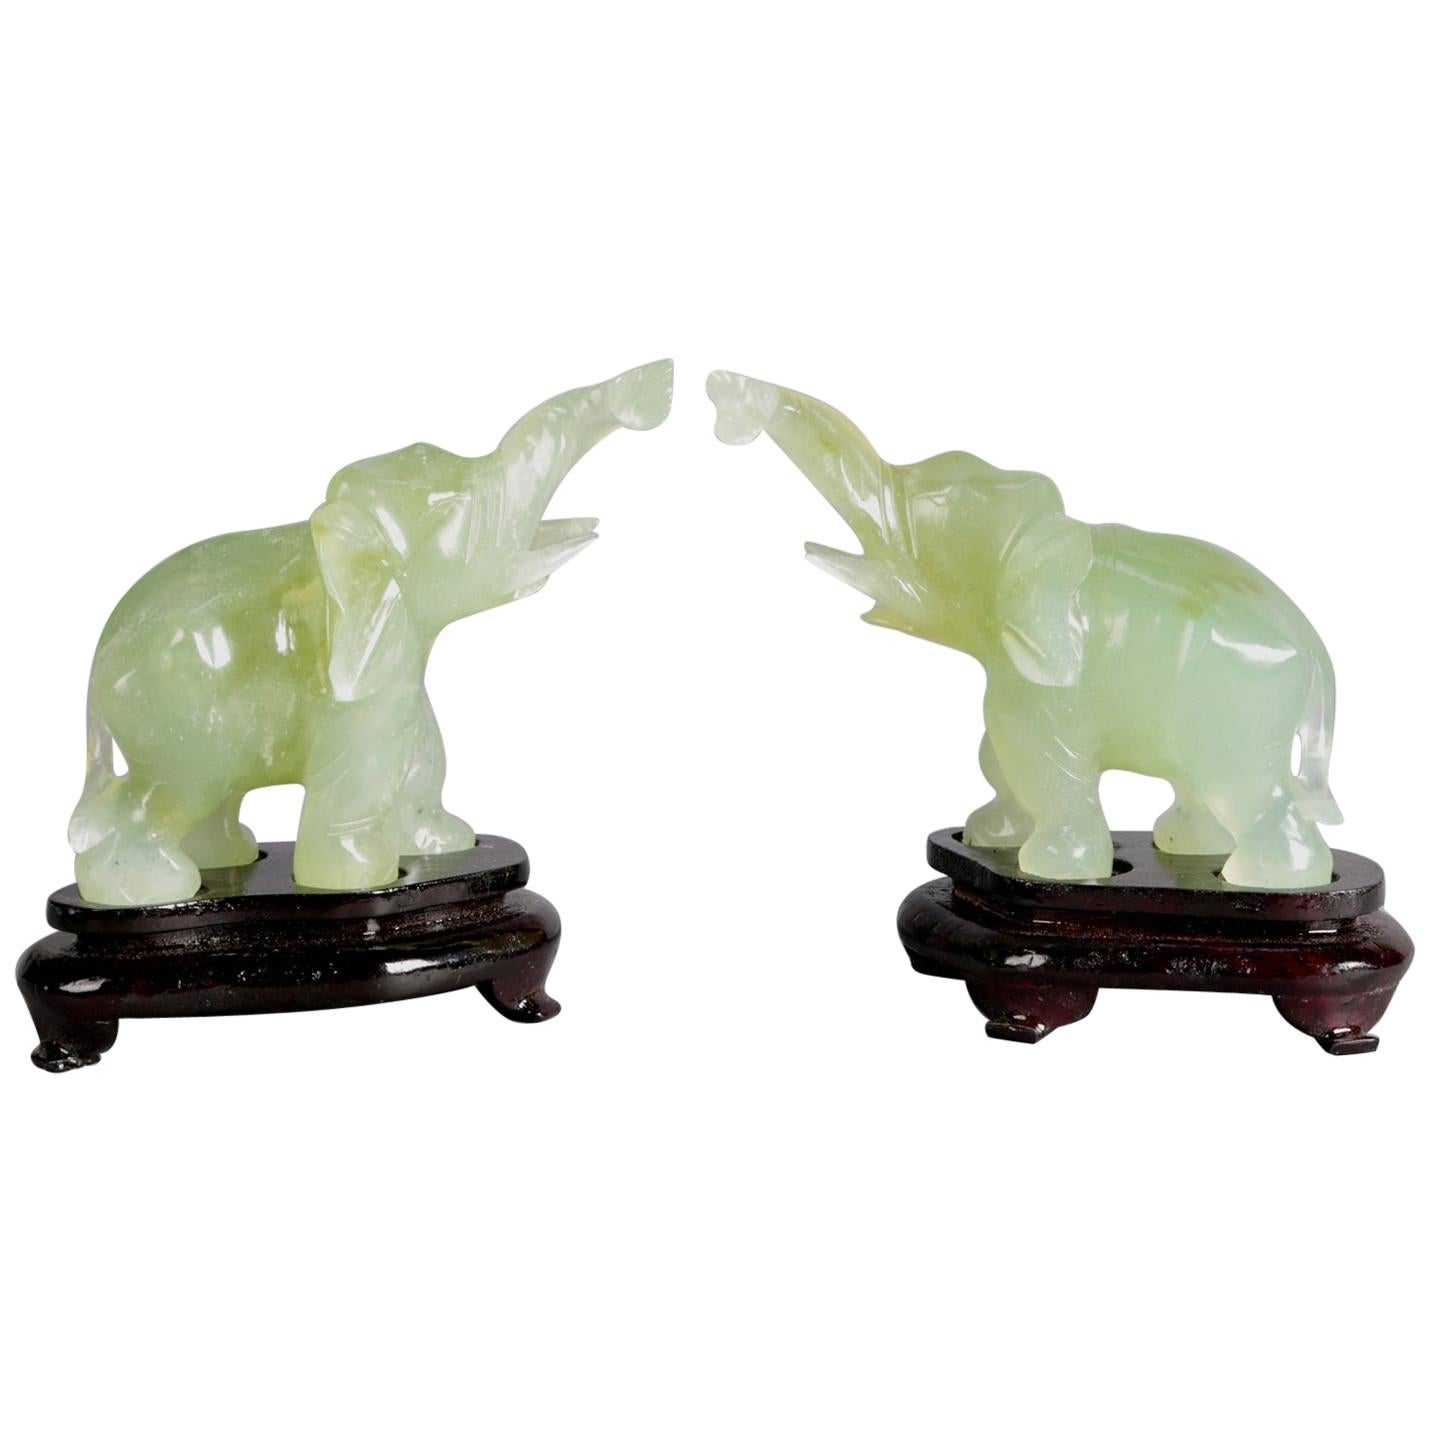 Pair of Chinese Carved Jade "Good Luck" Elephant Sculptures, 20th Century